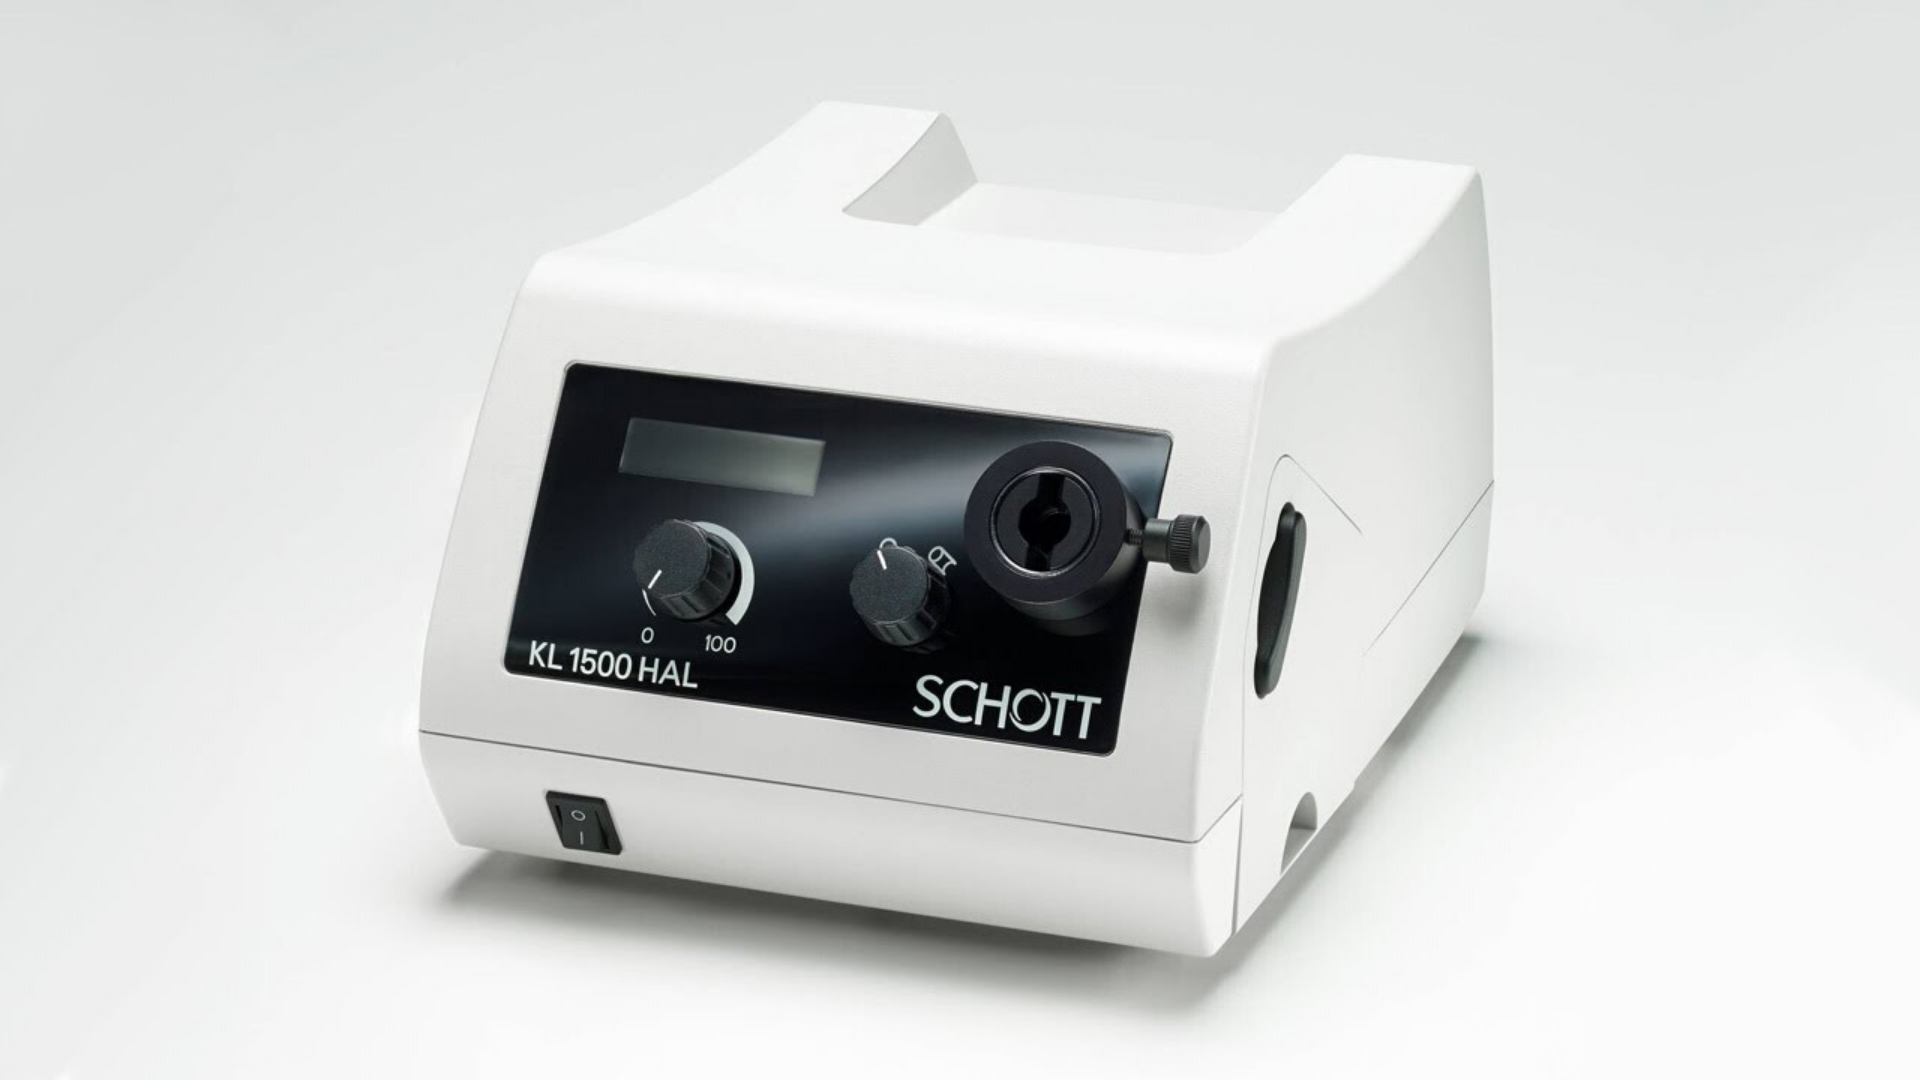 Click to find out how to use the SCHOTT KL 1500 LED Light Source